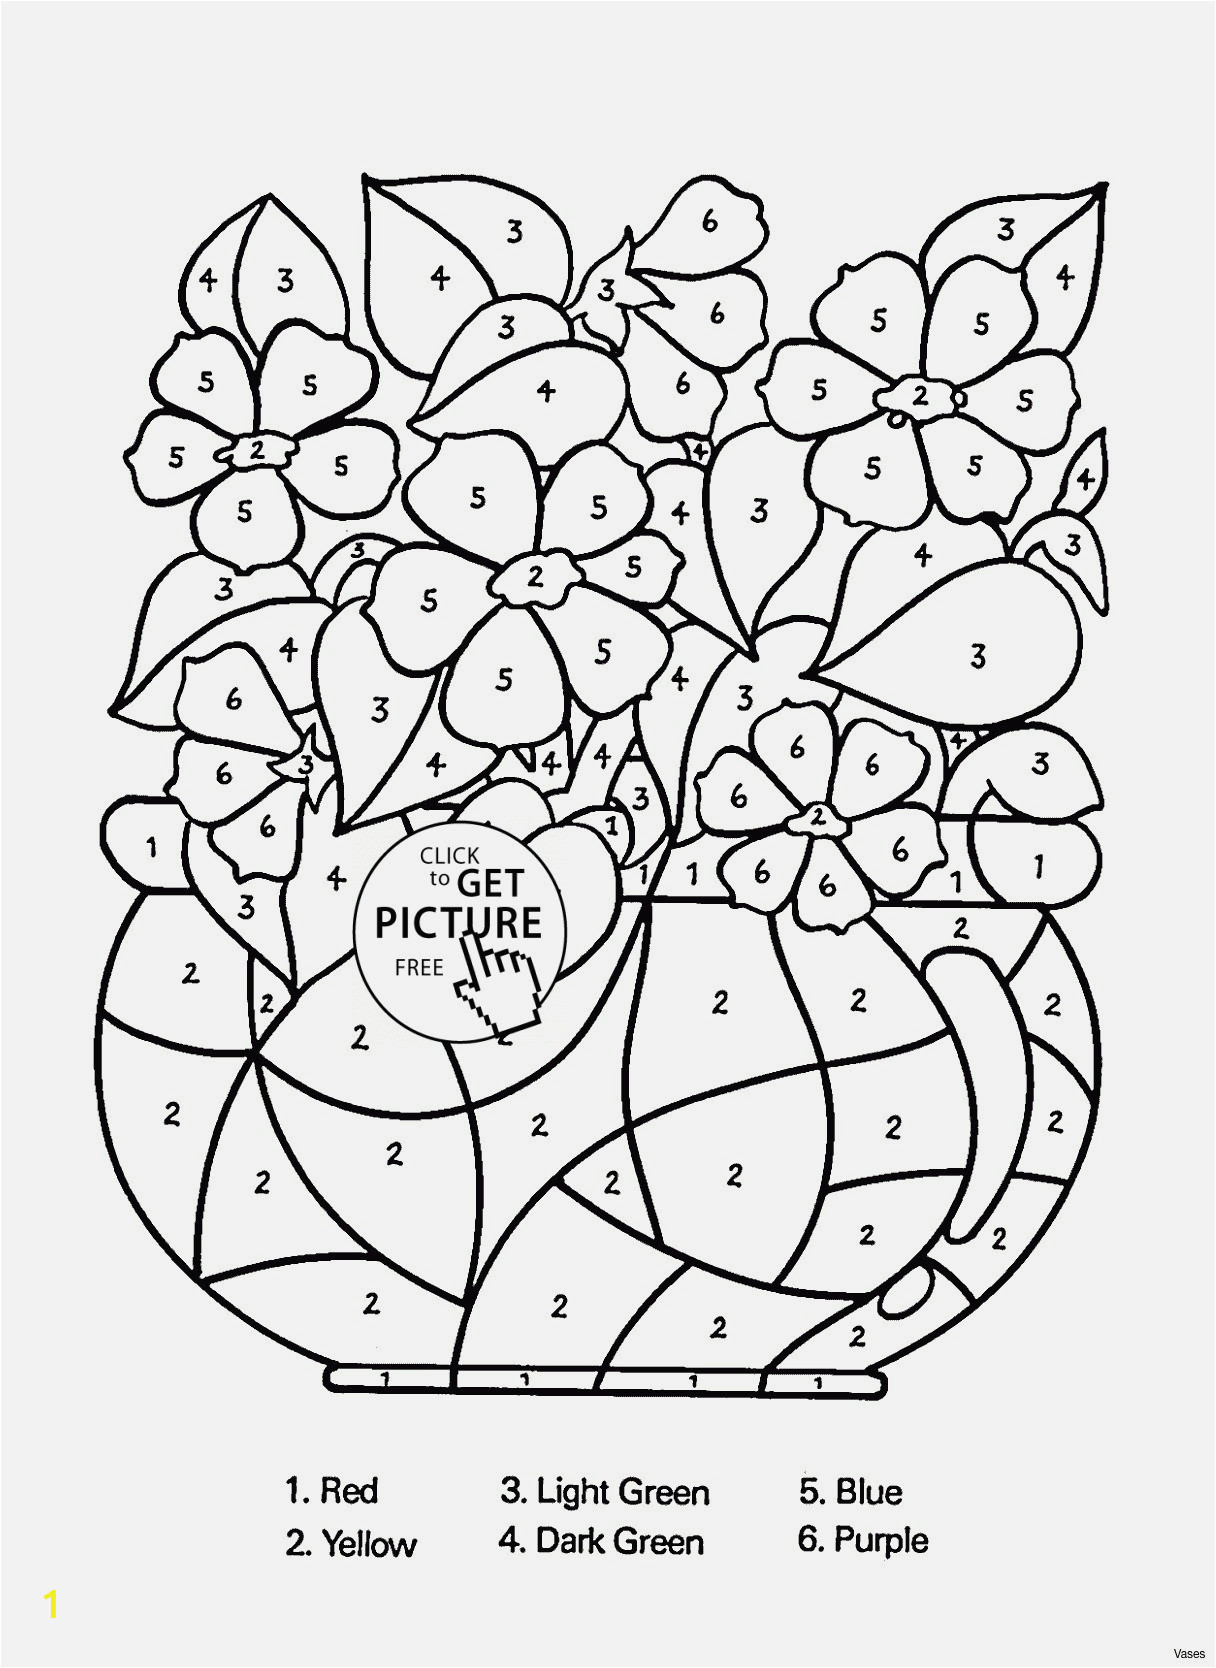 October Coloring Pages Free New Coloring Pages Free Bird Unique Parrot Elegant